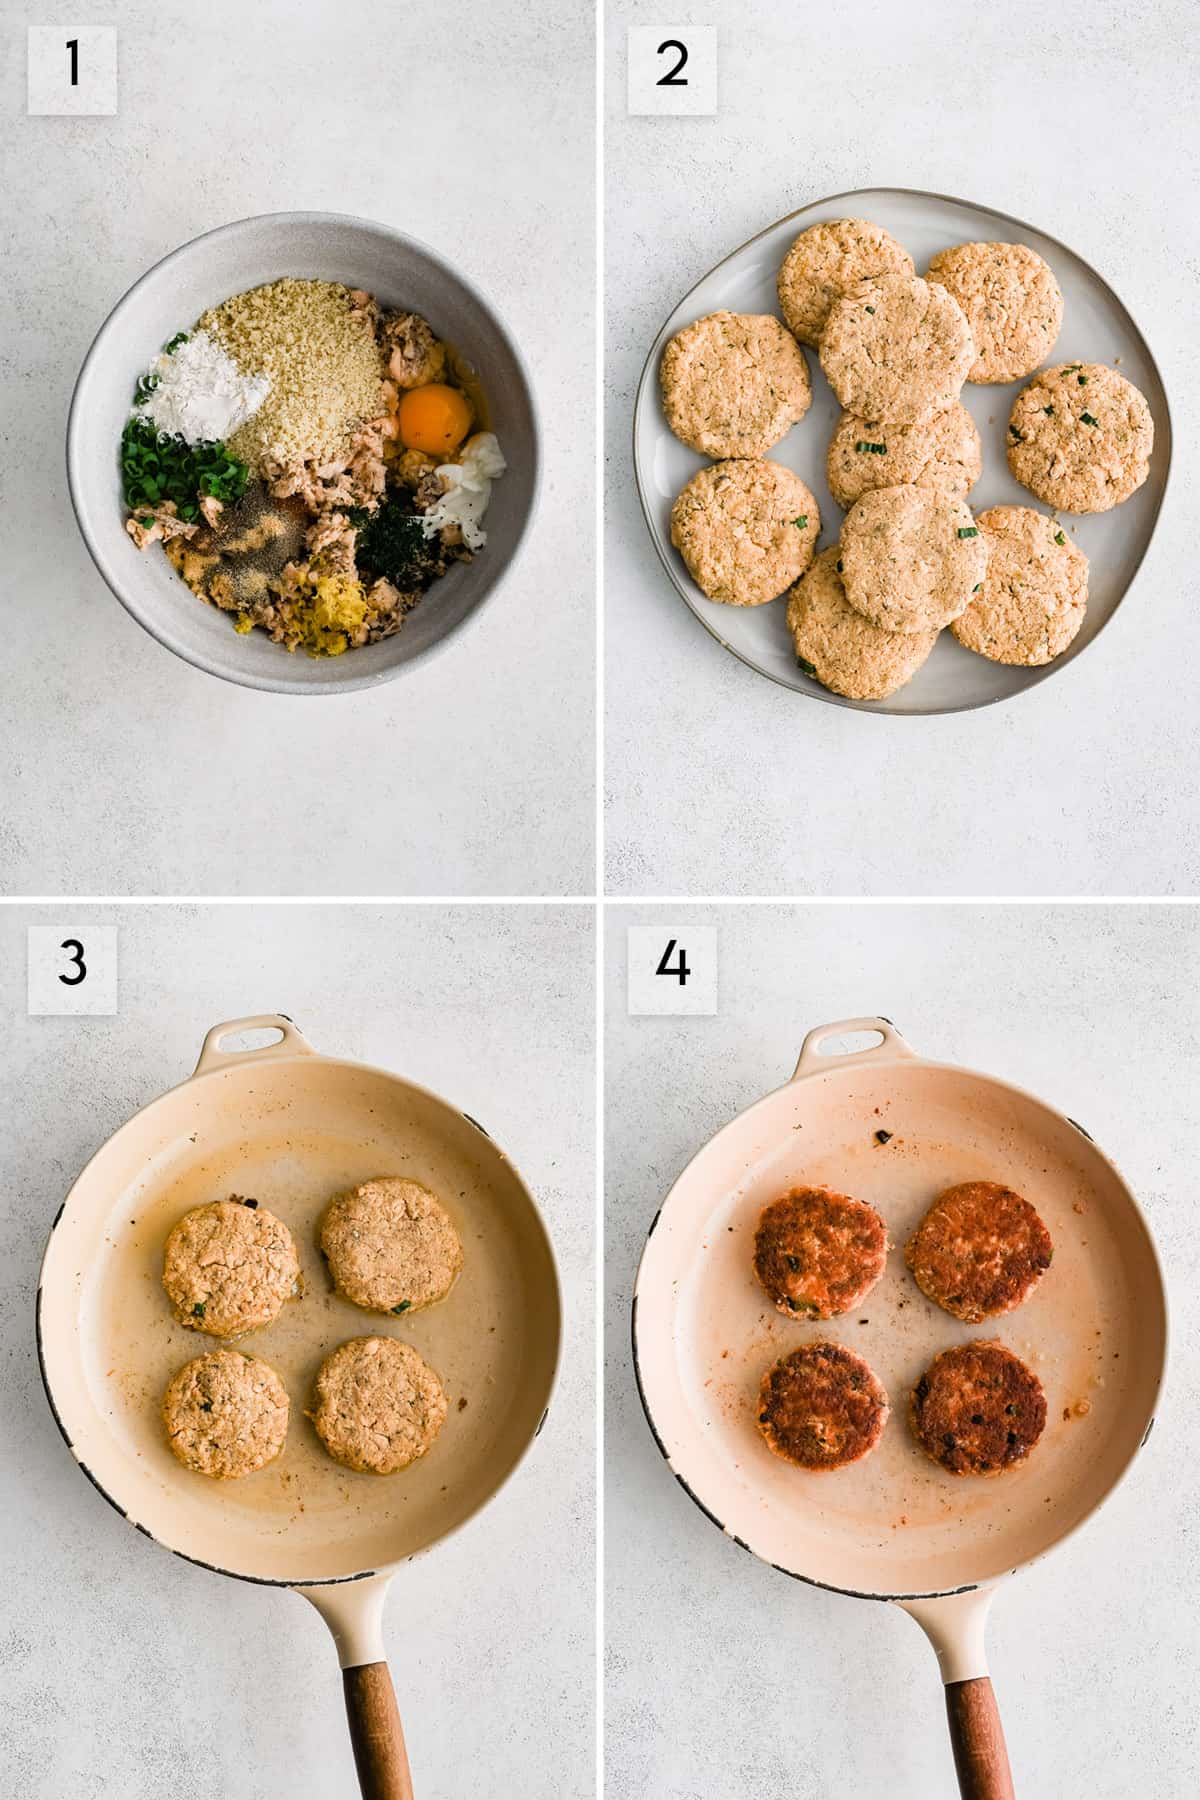 four panel collage image showing different stages of salmon patty preparation